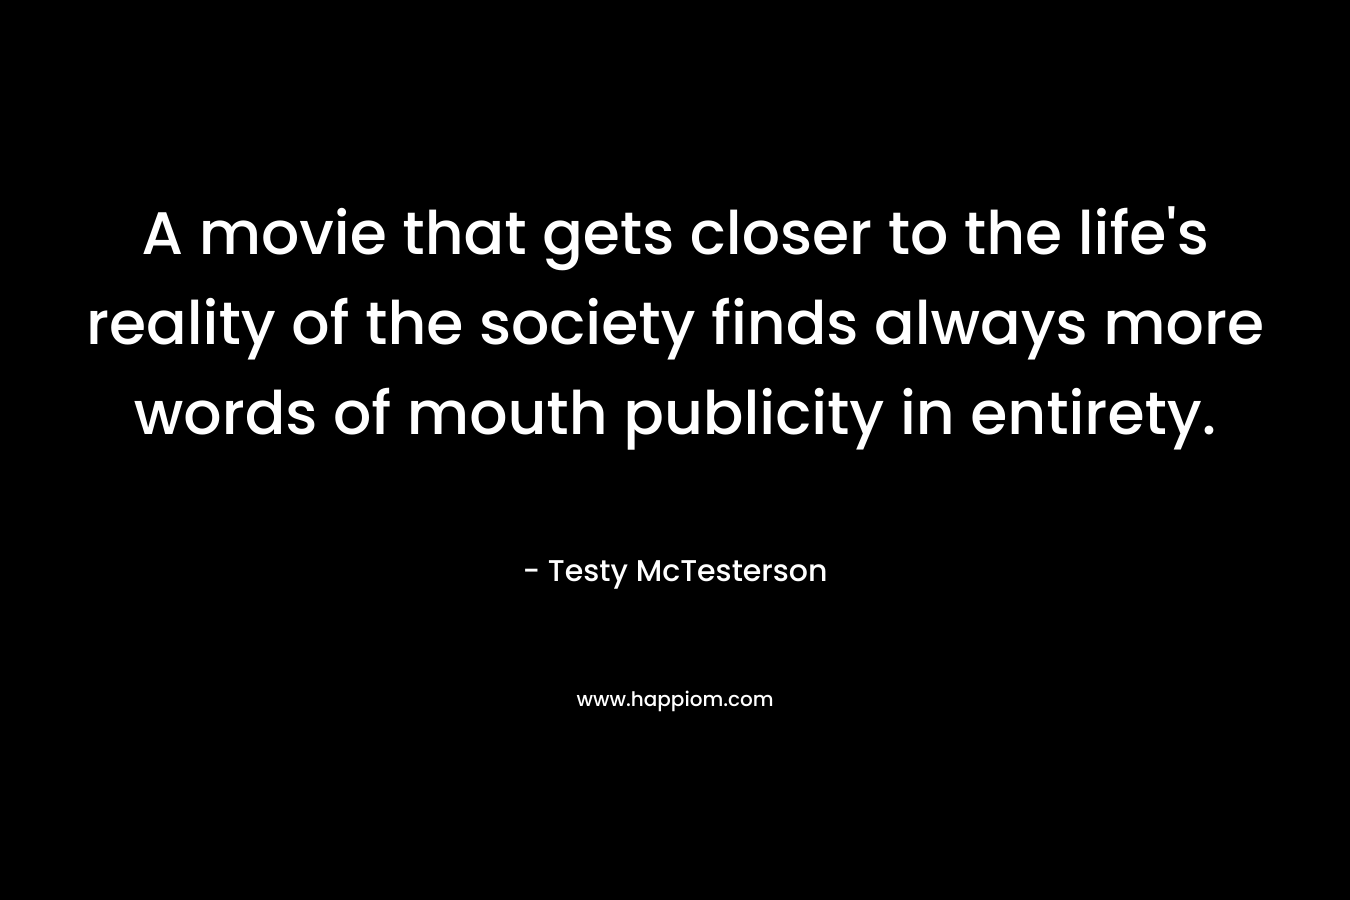 A movie that gets closer to the life's reality of the society finds always more words of mouth publicity in entirety.